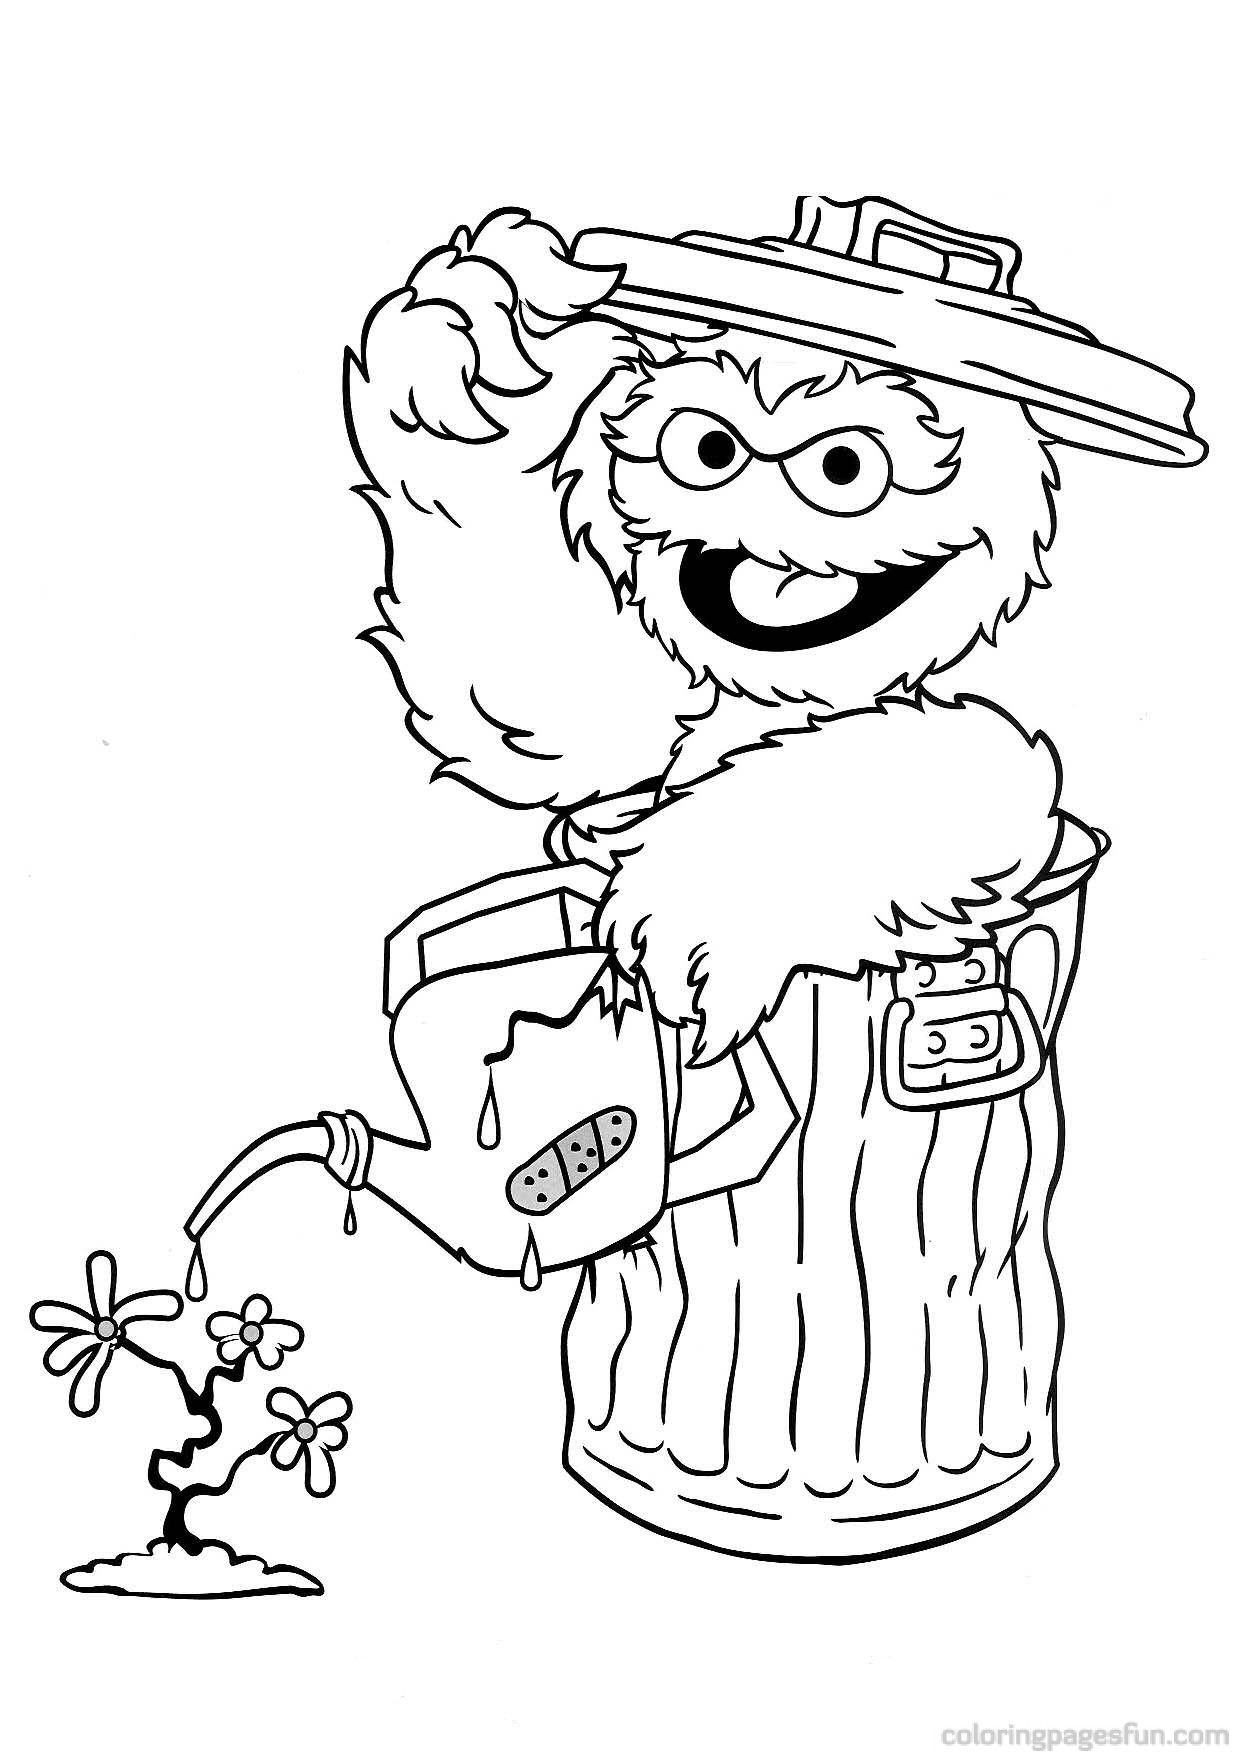 Sesame Street Coloring Pages Awesome Coloring Pages | Sesame Street - Free Printable Sesame Street Coloring Pages